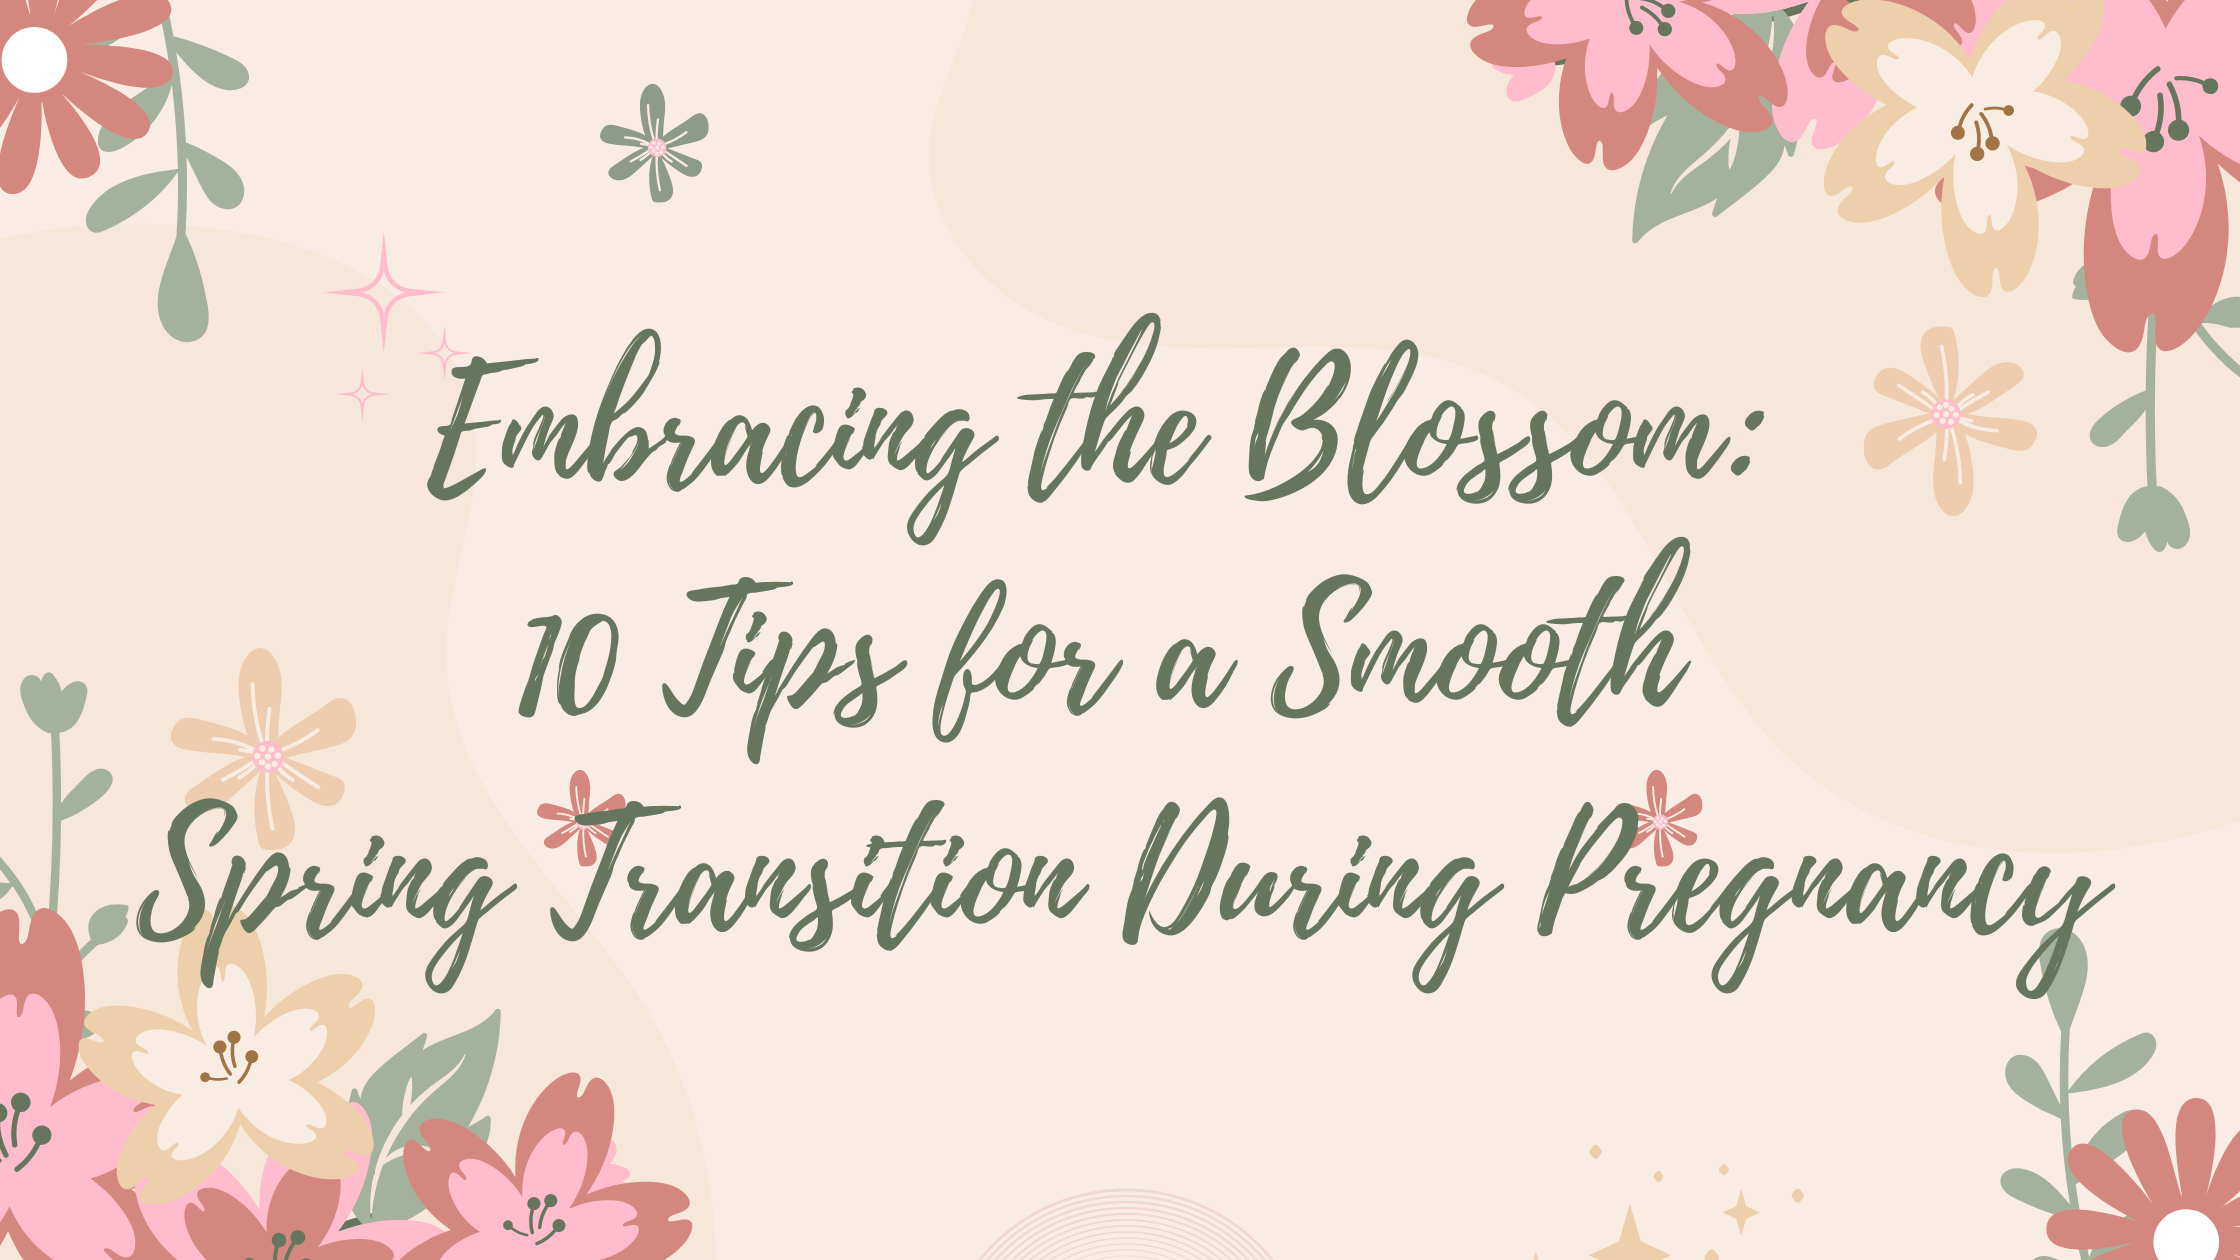 Embracing the Blossom: 10 Tips for a Smooth Spring Transition During Pregnancy